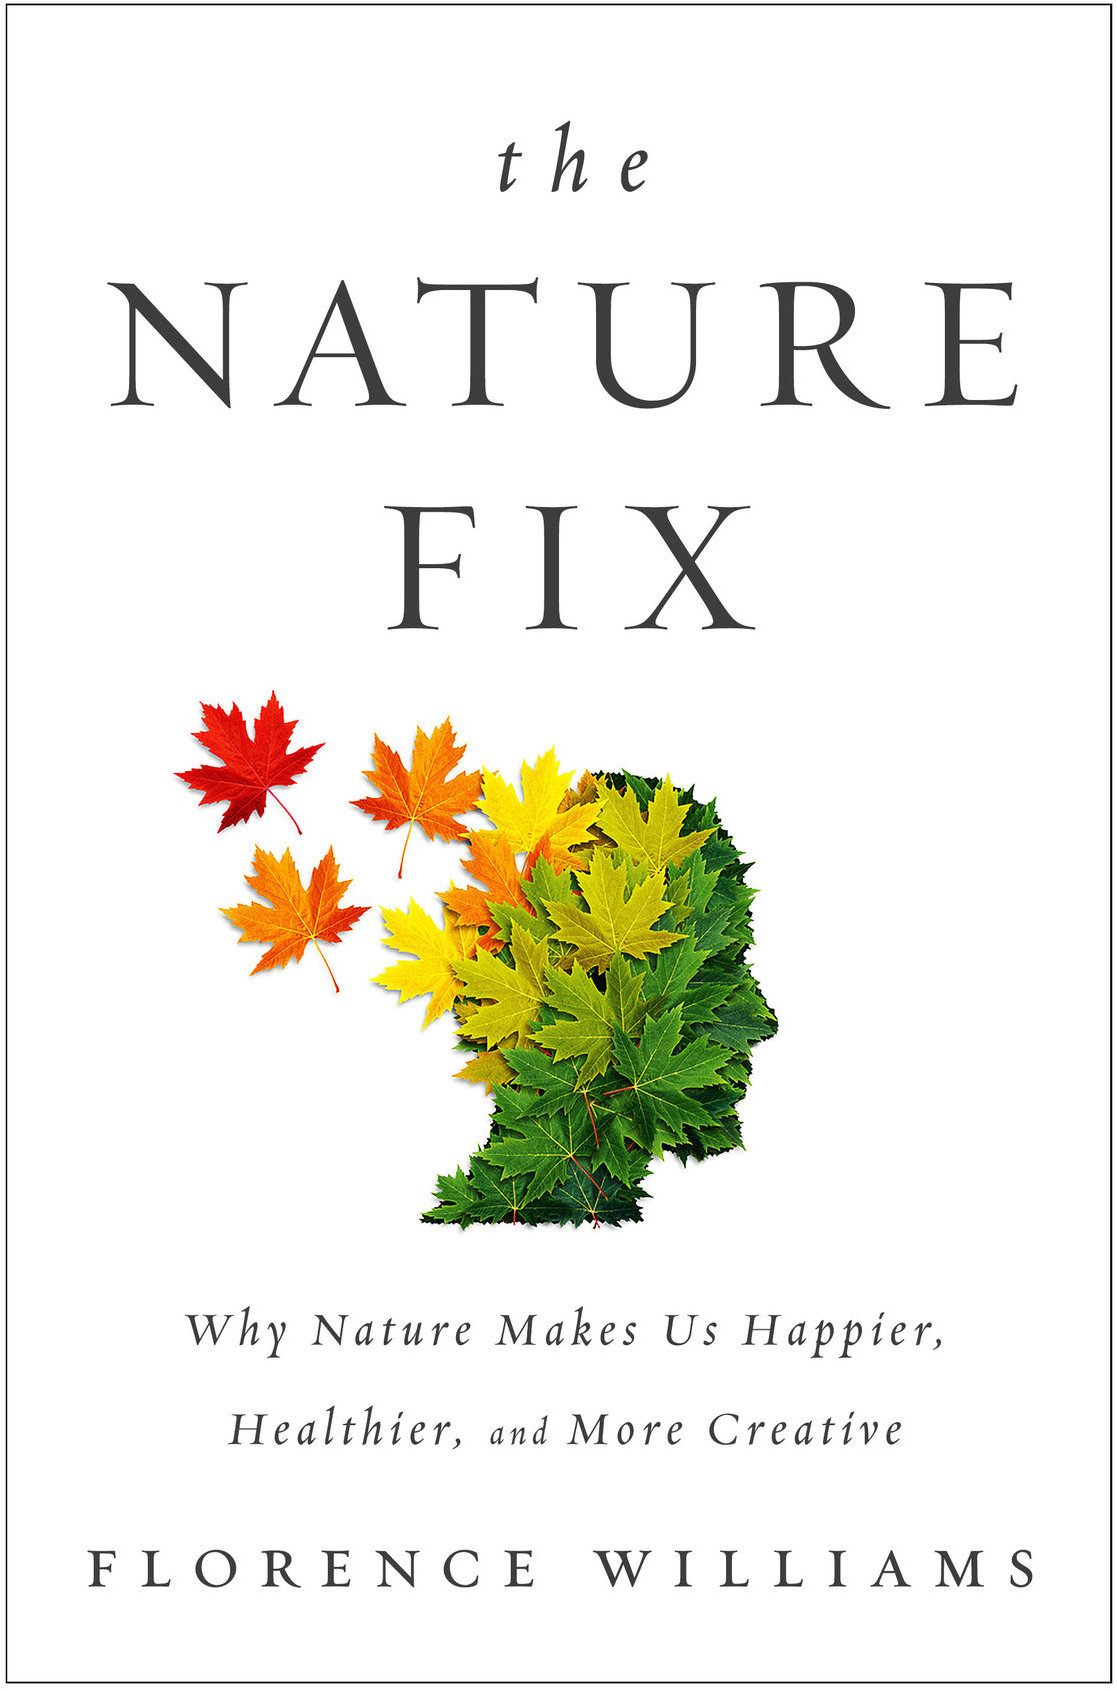 The Nature Fix by Florence Williams